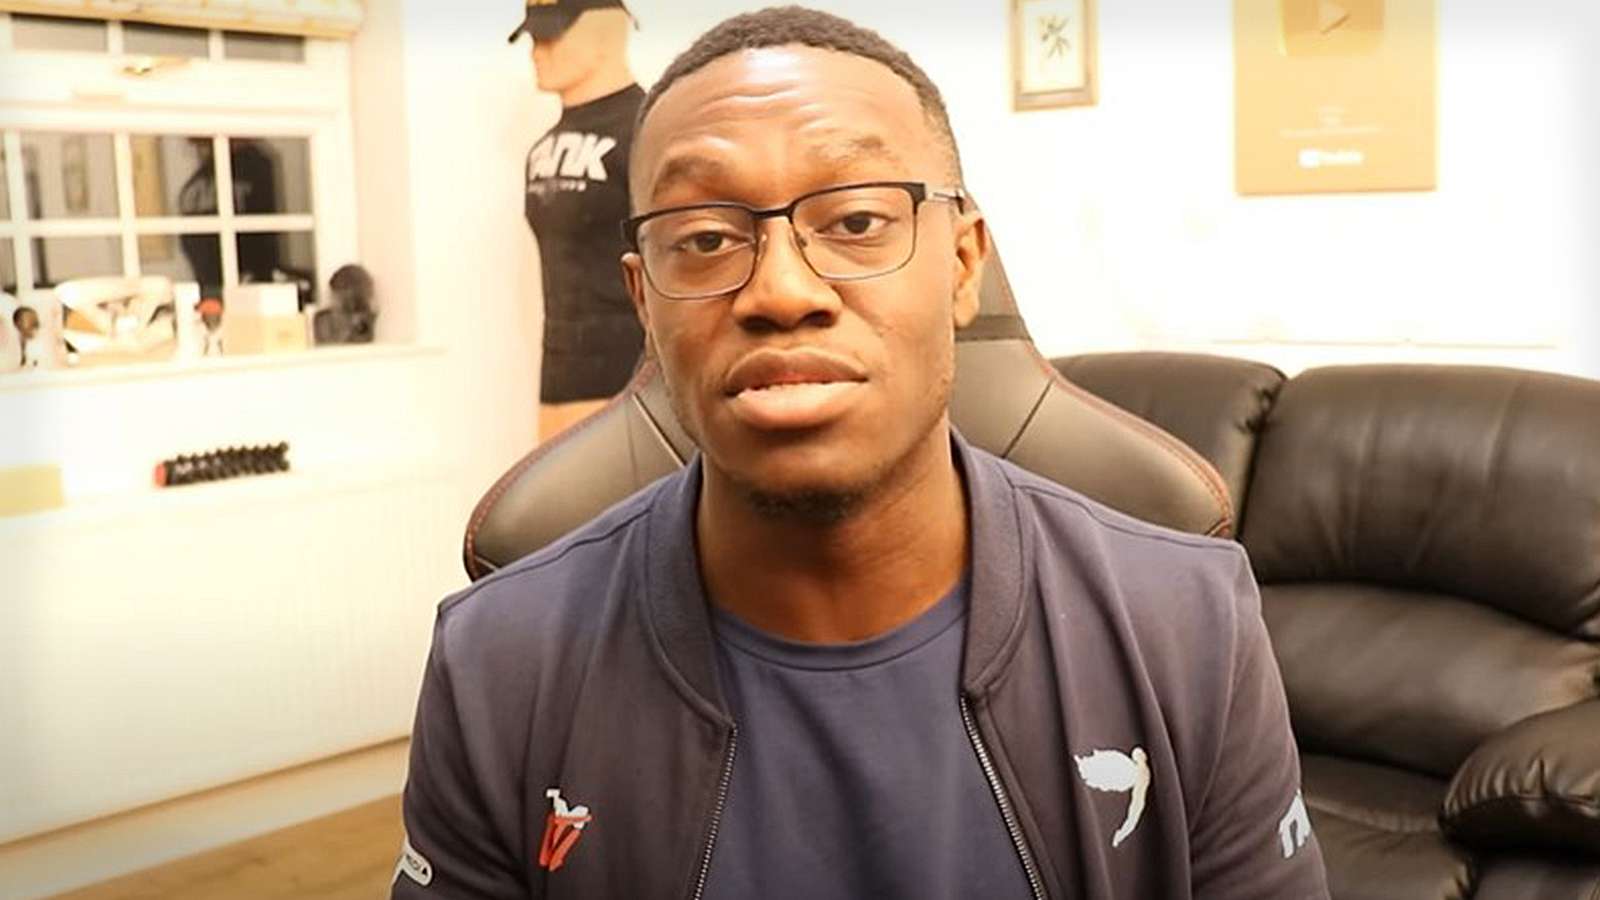 Deji claims Mayweather made drastic change to fight last minute copy 2